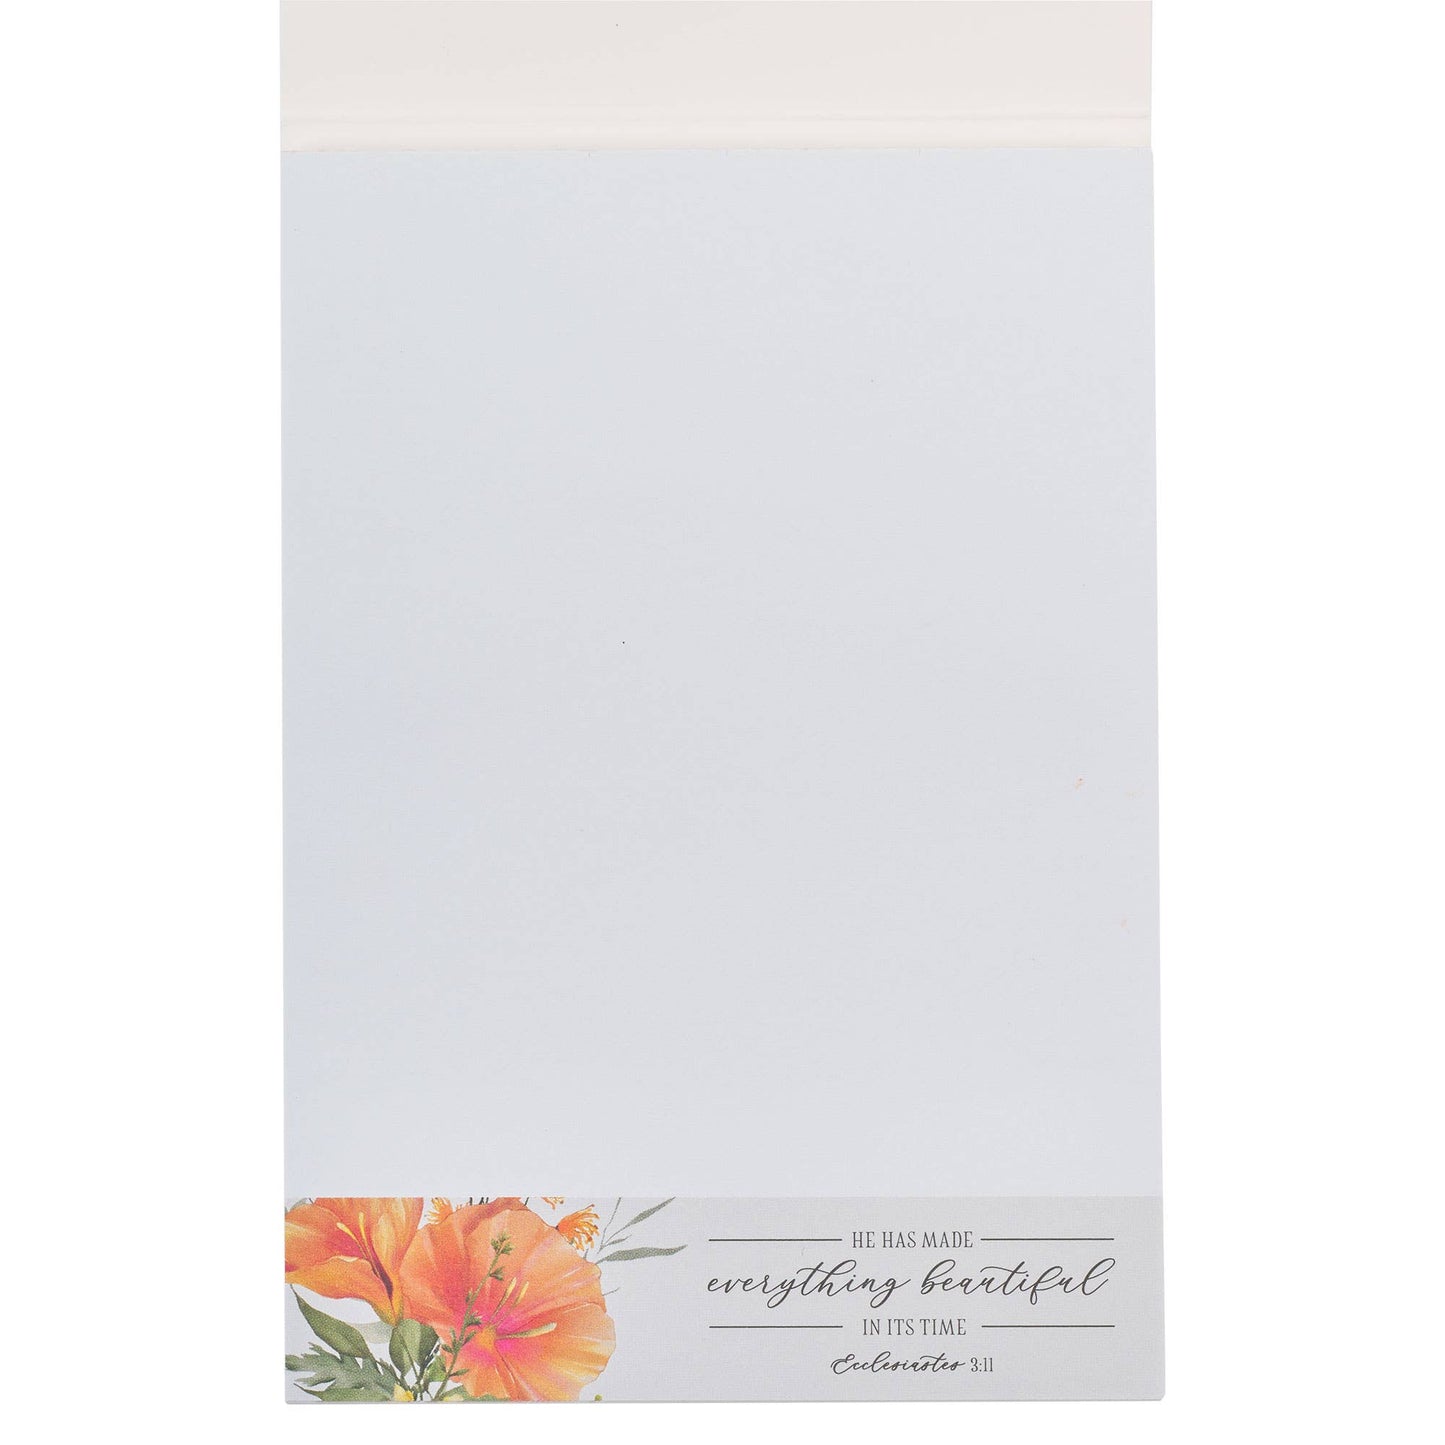 Everything Beautiful Orange Floral Notepad - Eccles 3:11